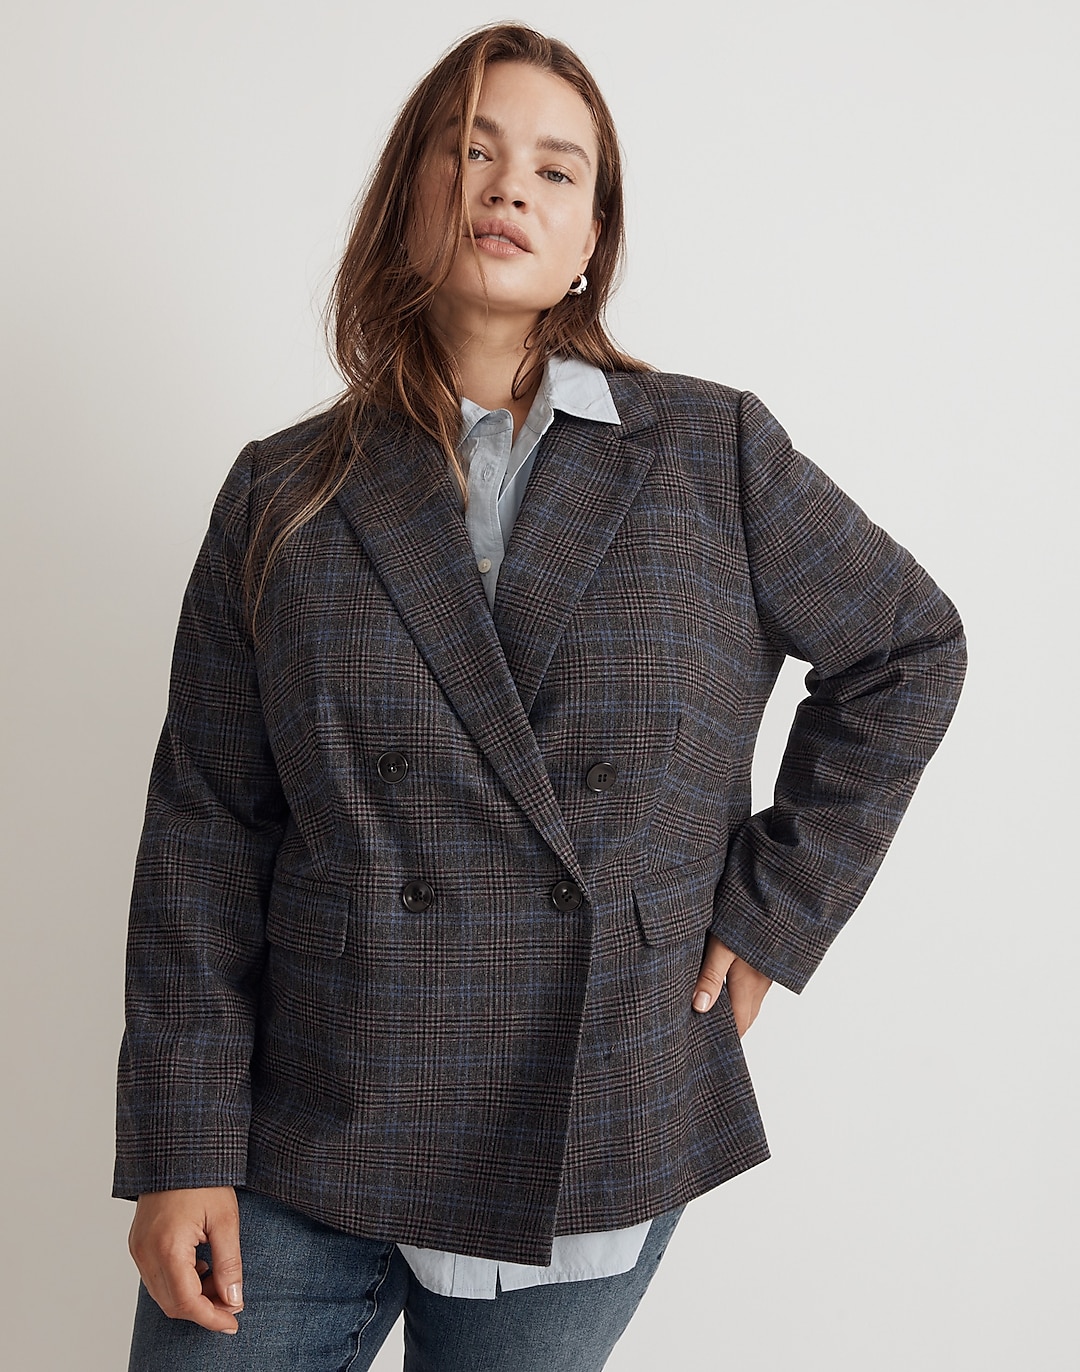 The Plus Rosedale Blazer in Plaid | Madewell